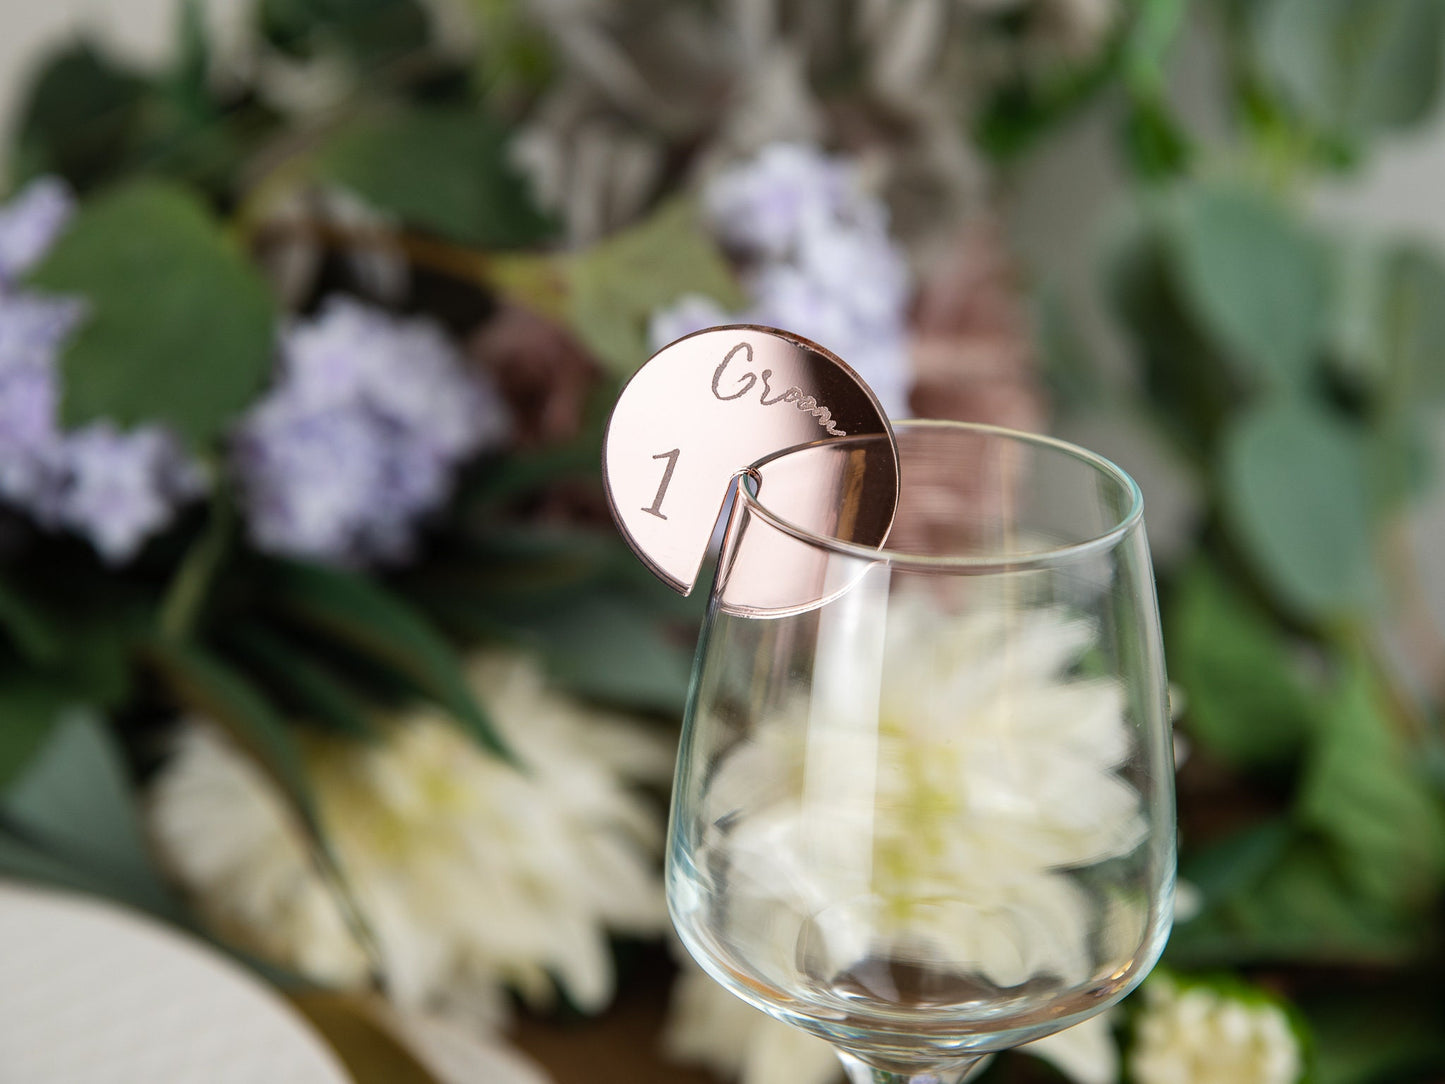 Acrylic Wedding Name Place Cards Ideas, Circle Place Names Wedding Favours, Disc Name Tags for Glass Place Setting Holder Drink Charm